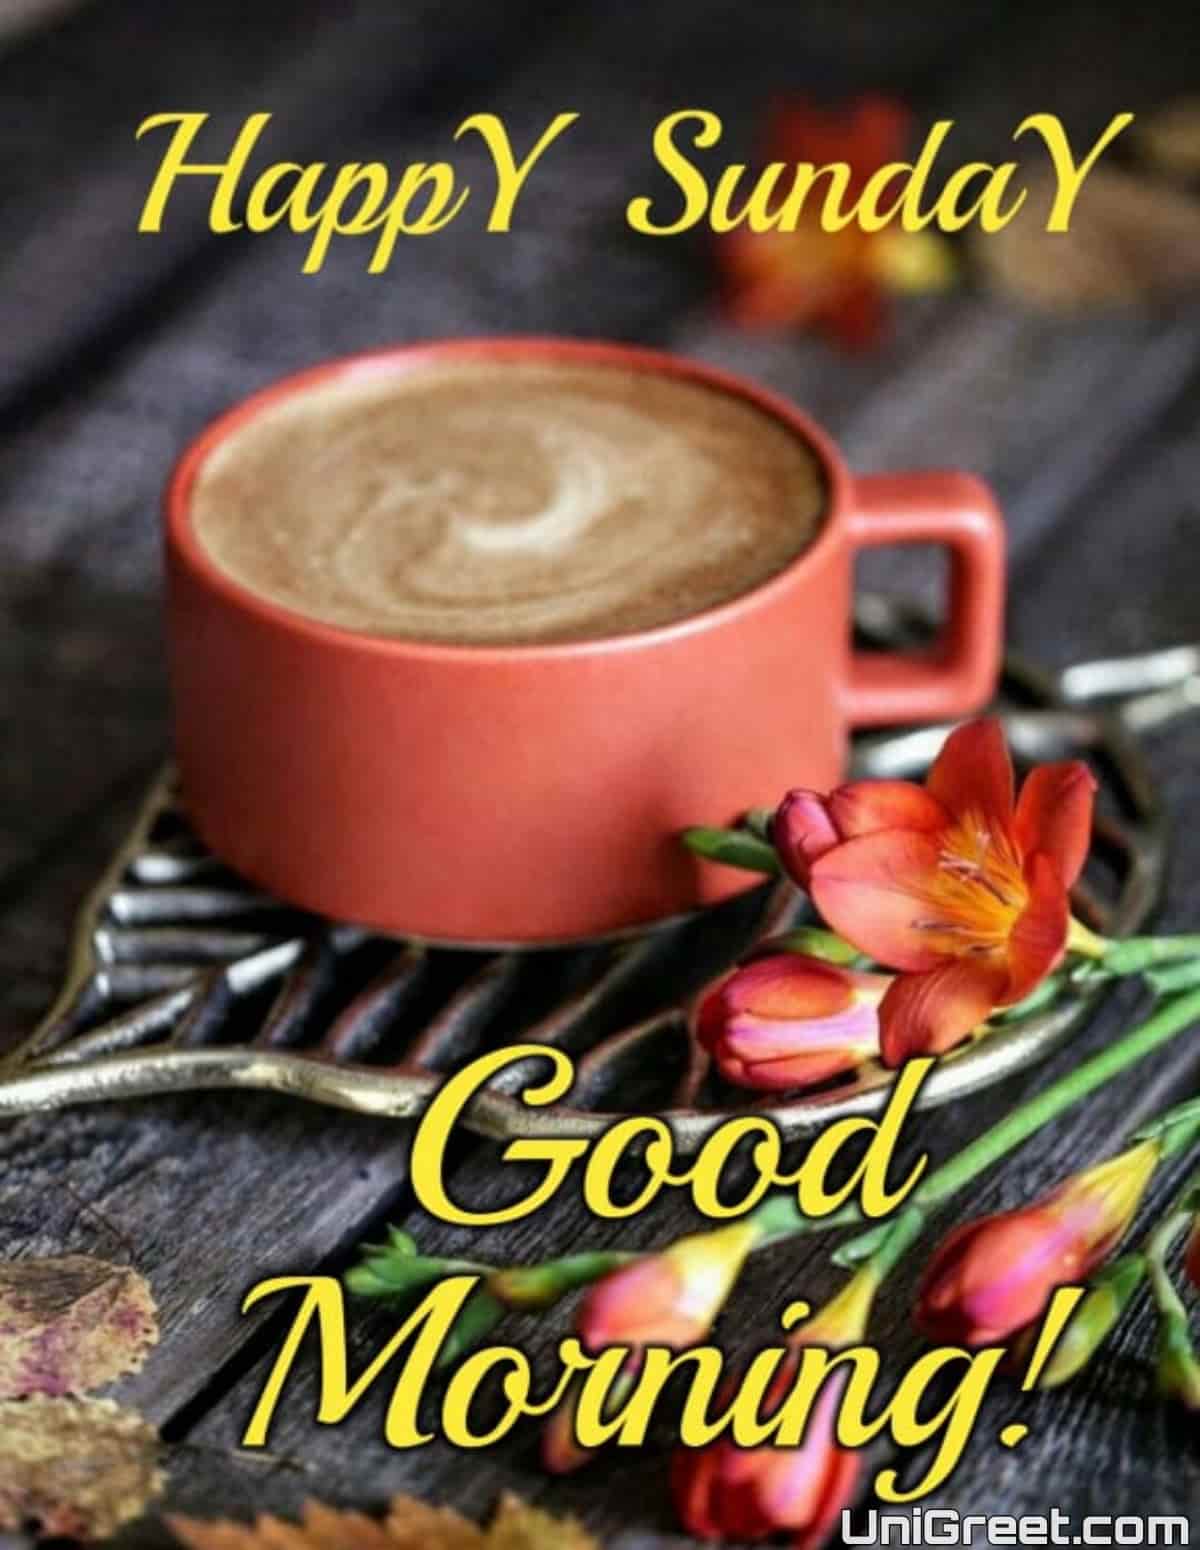 Astounding Compilation of 999+ Good Morning Happy Sunday Images in Full 4K Quality